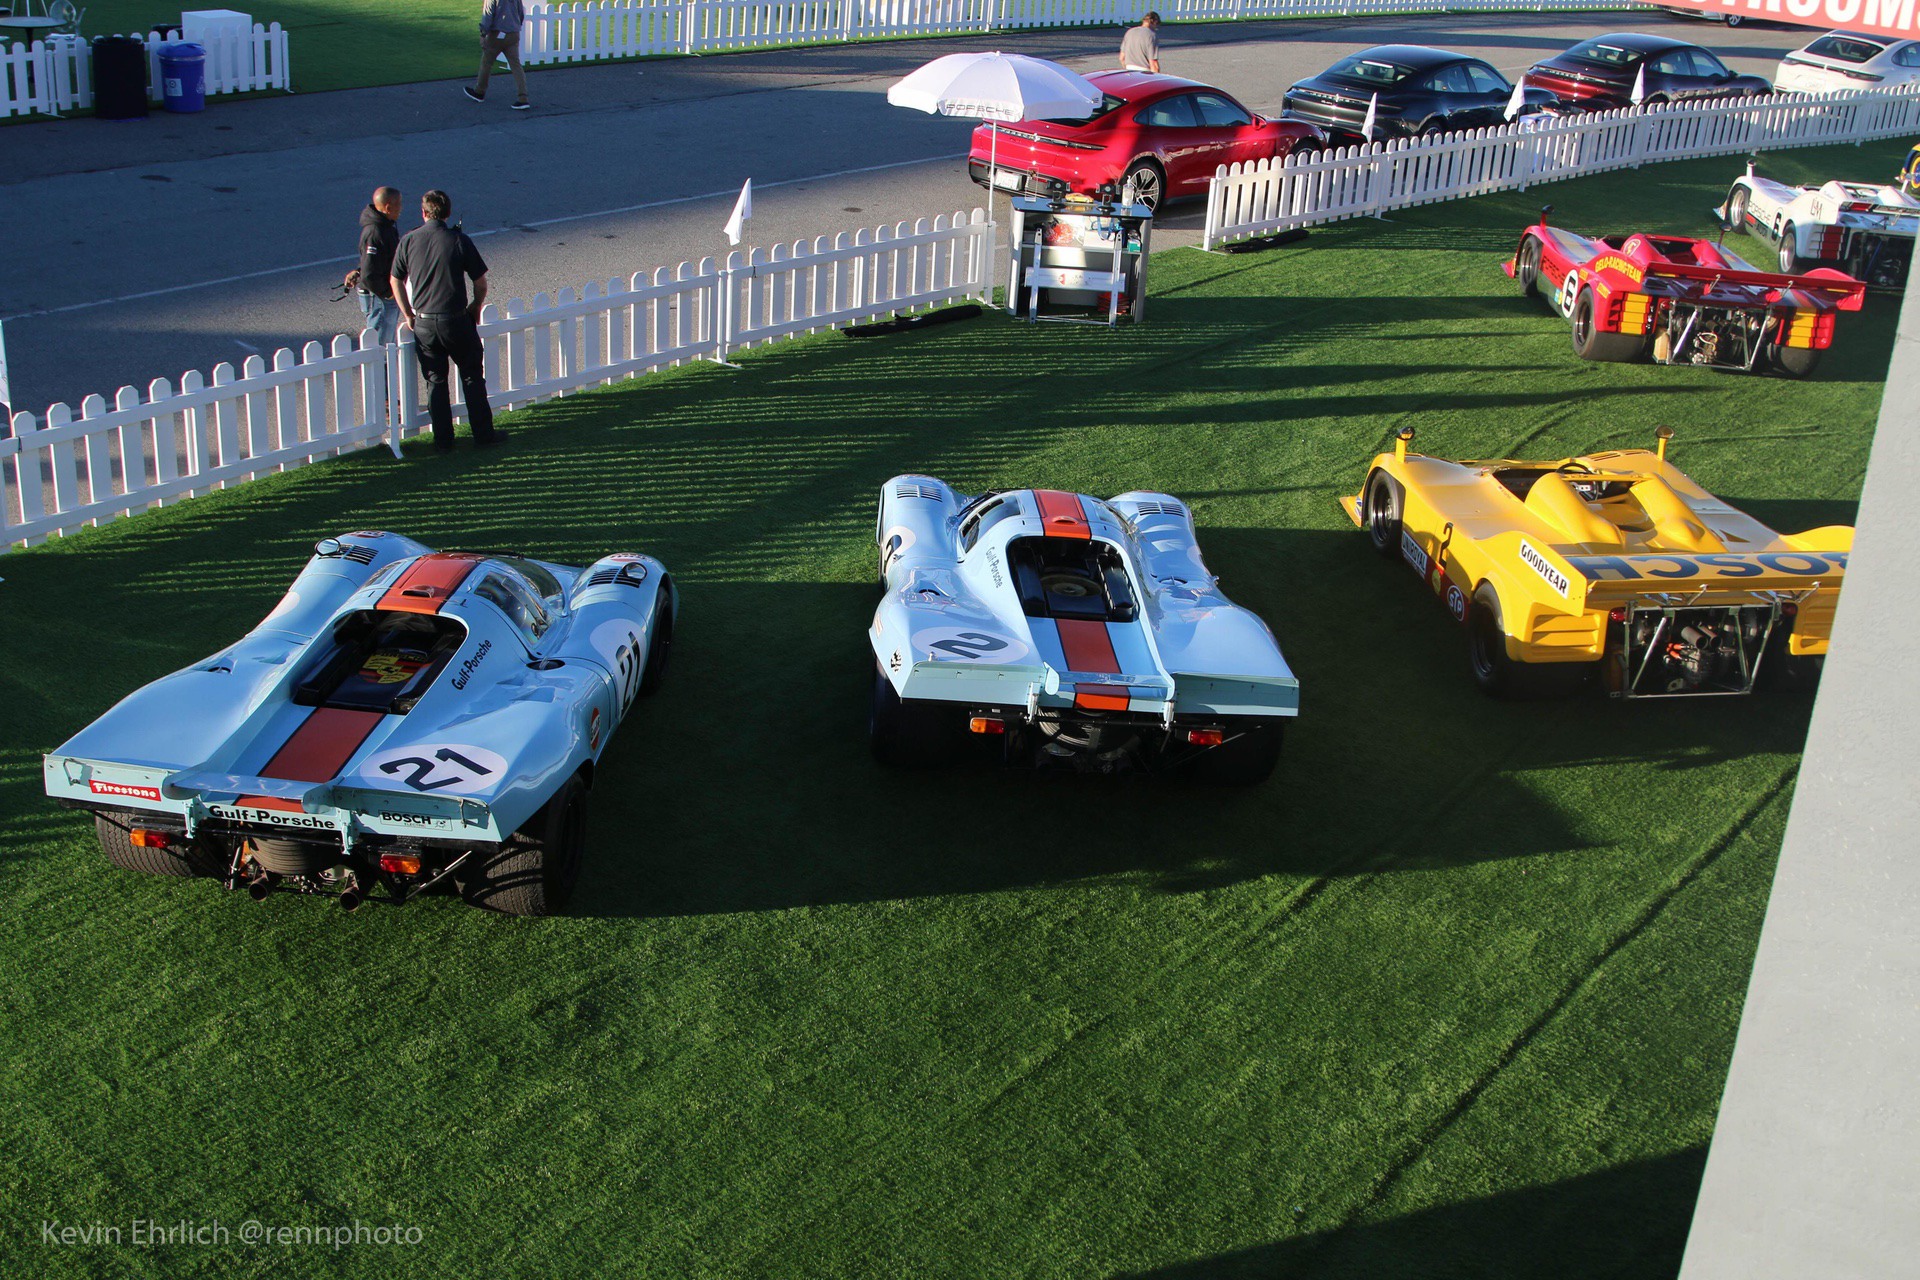 Different Porsche 917 cars parked on grass for Velocity Invitational